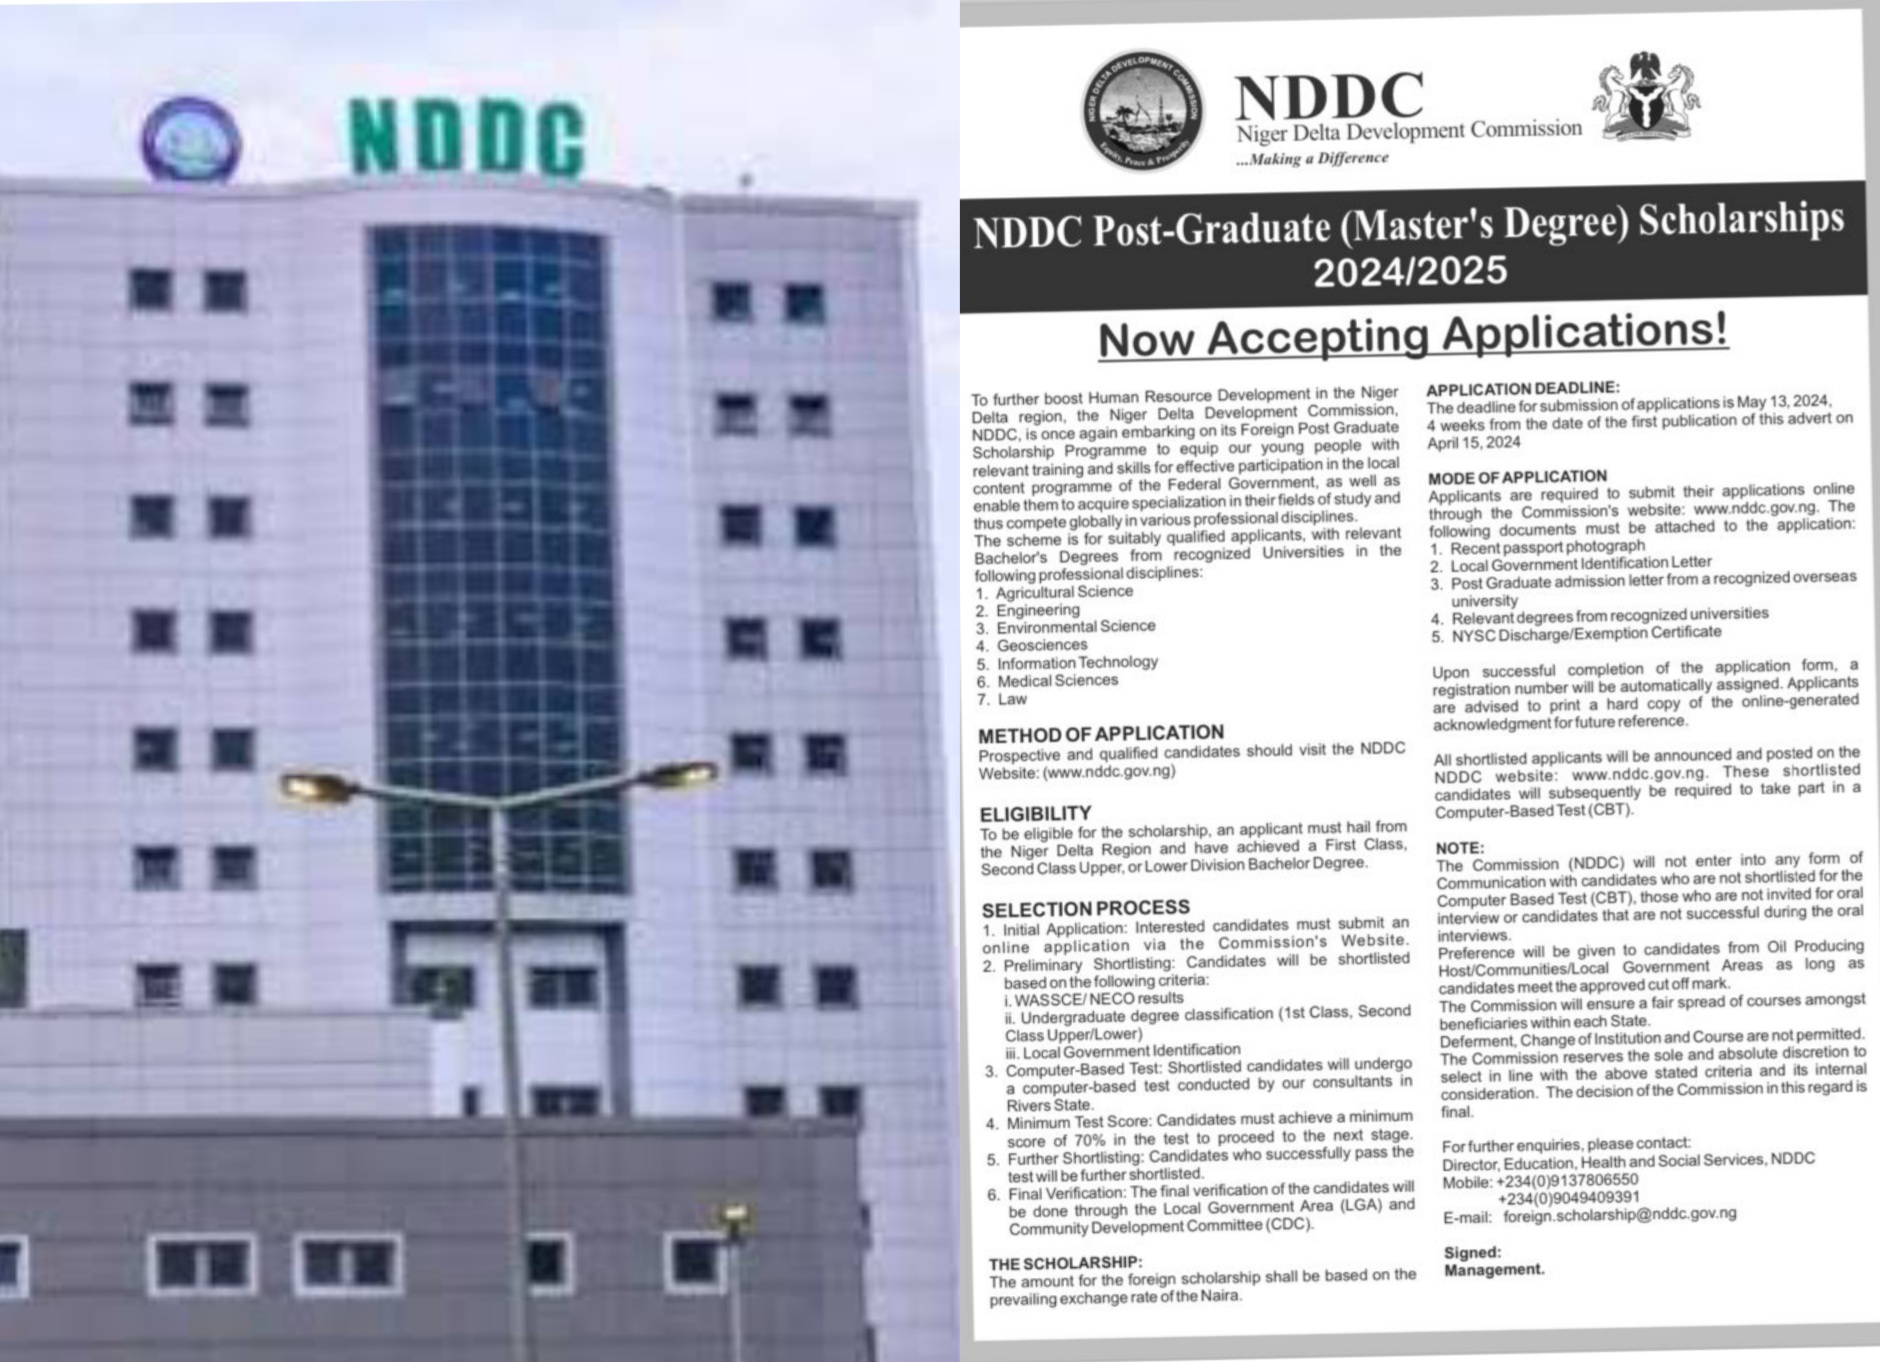 How to Apply for 2024/2025 NDDC Postgraduate Scholarship